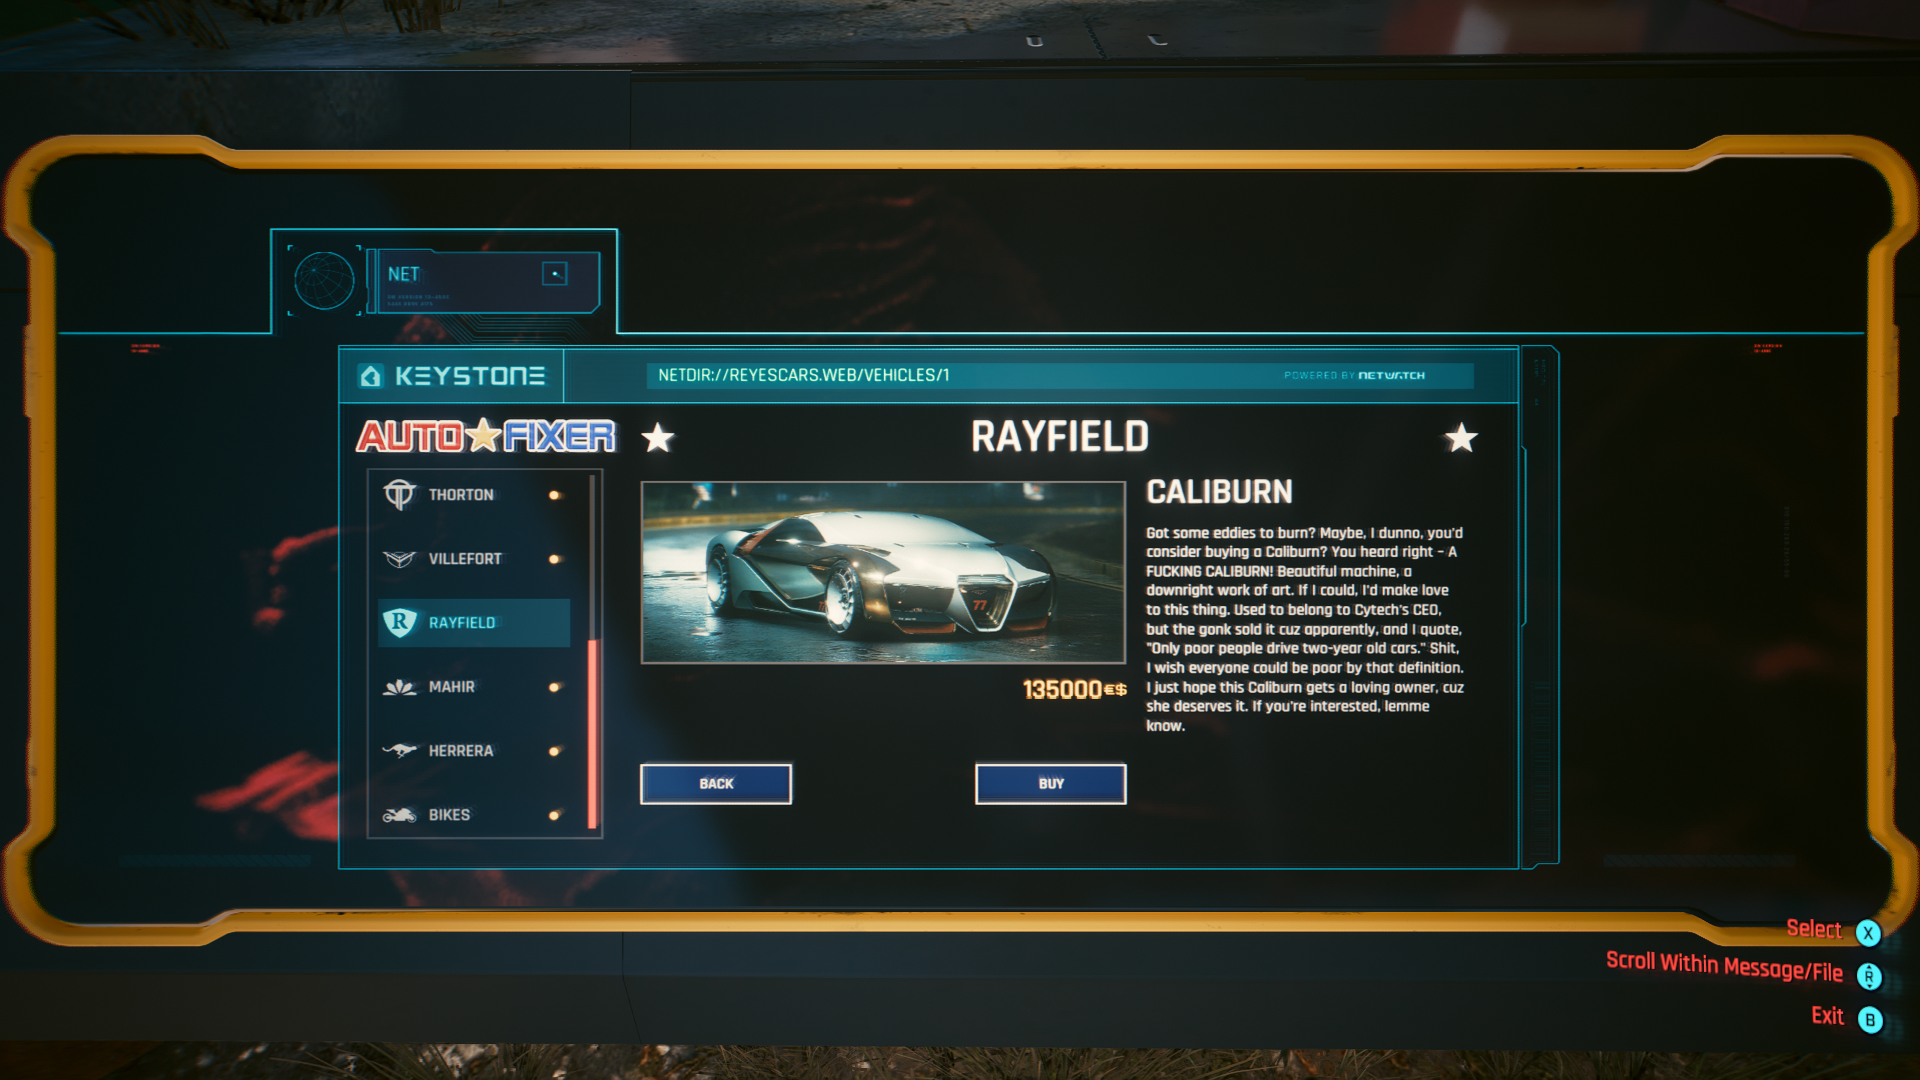 An AUTOFIXER netpage listing for a Rayfield Caliburn in Cyberpunk 2077.